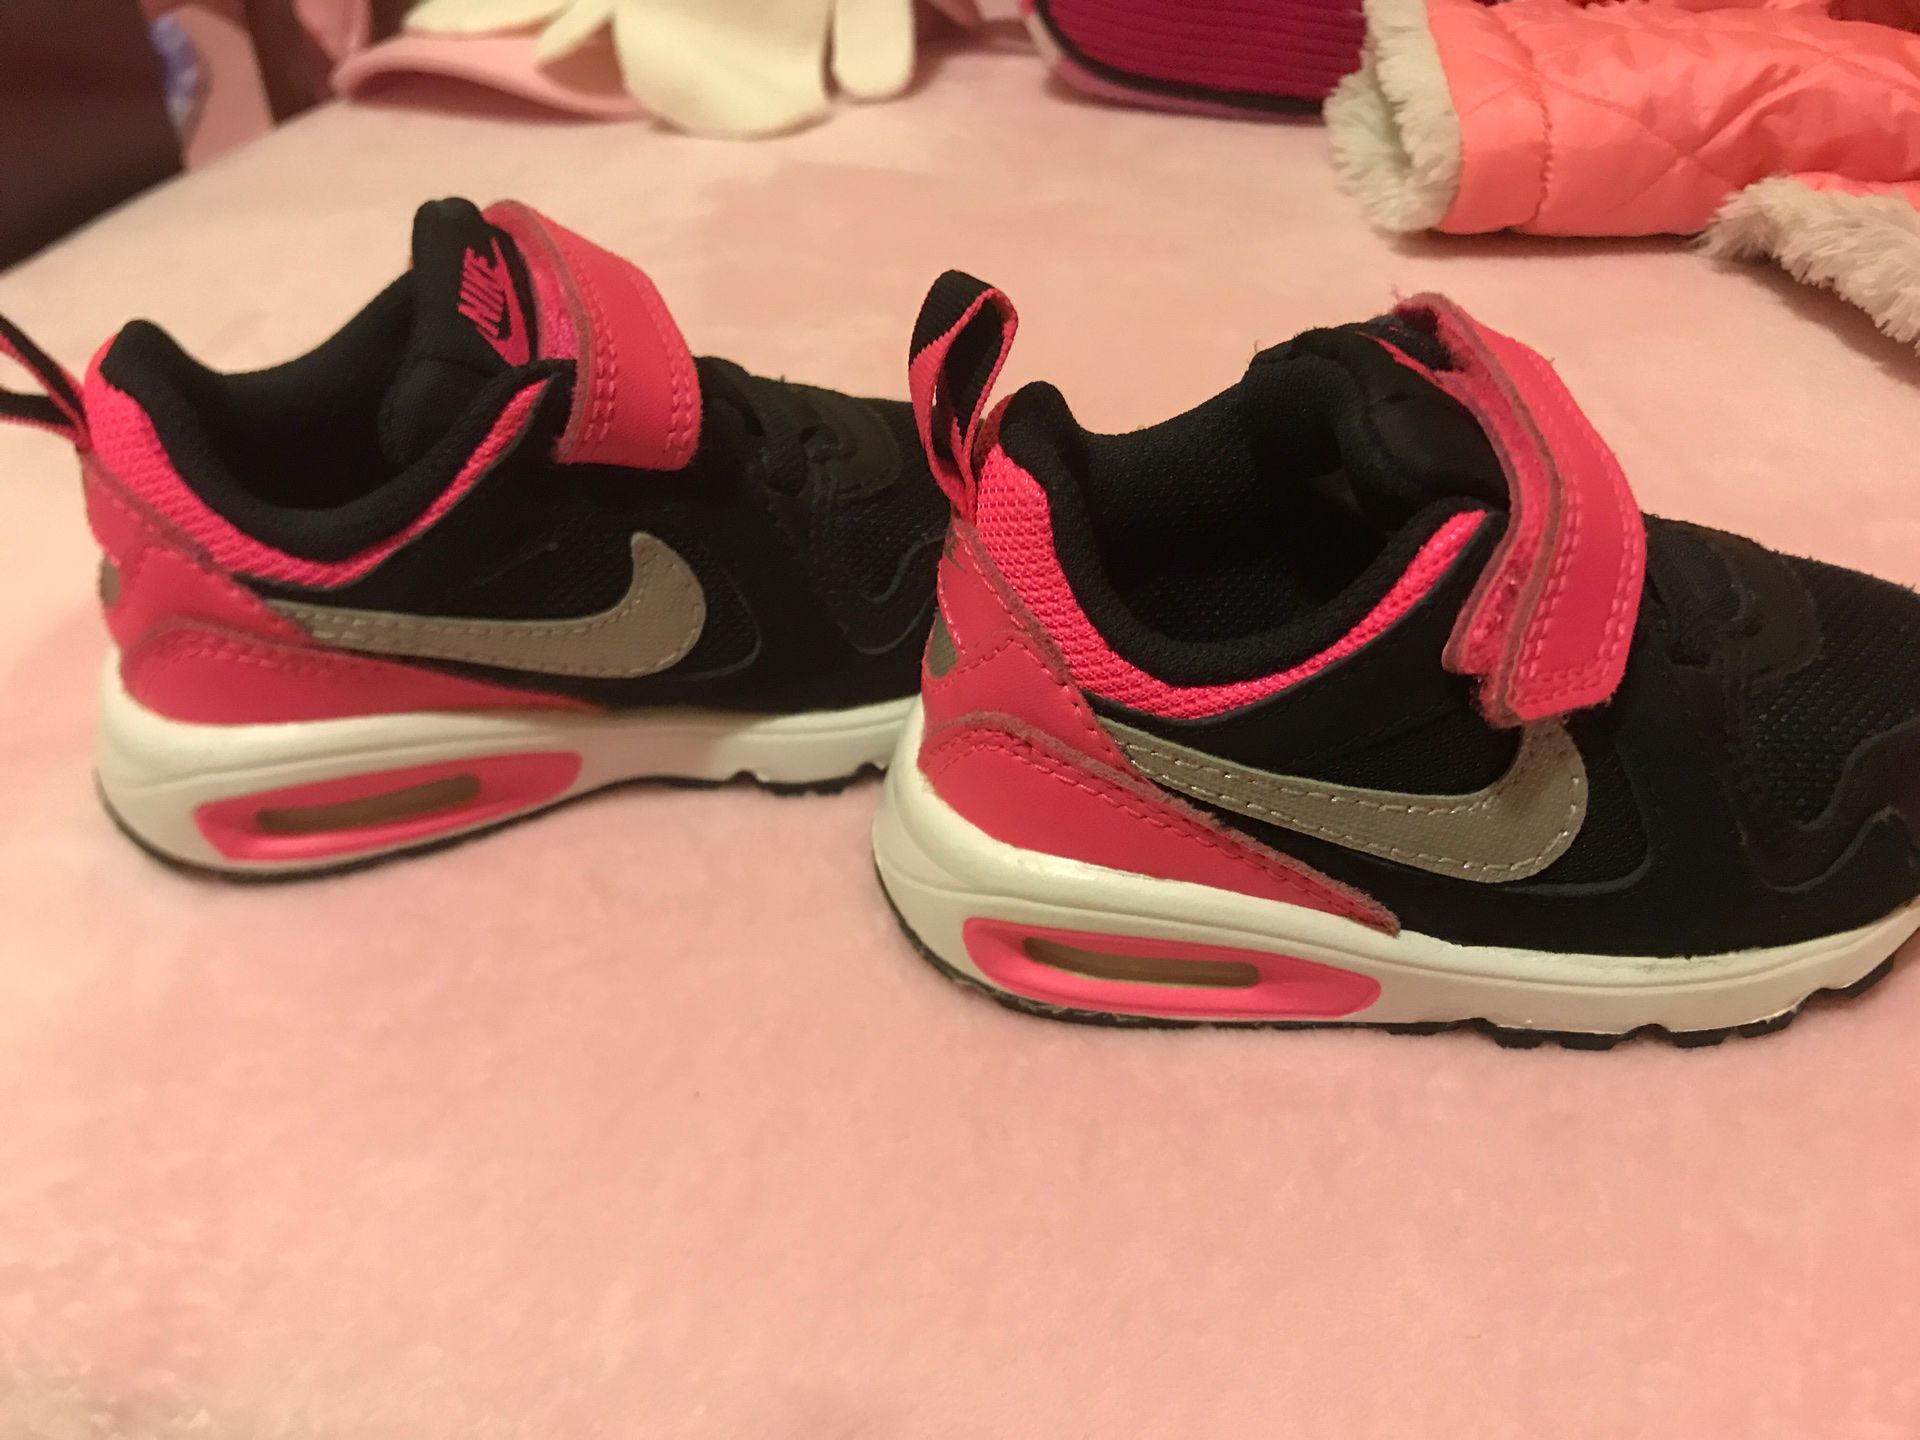 Nike hot pink and black sneakers